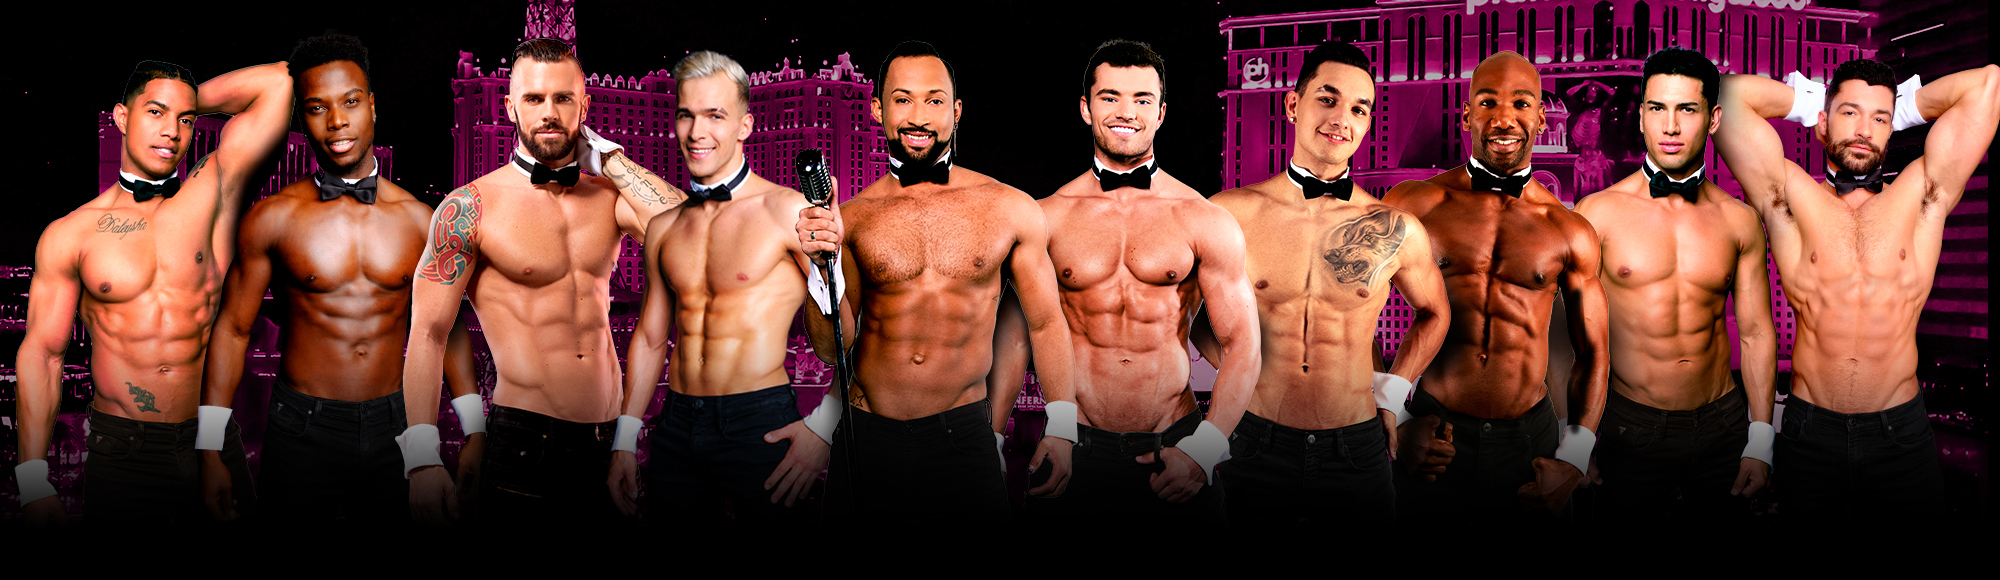 Chippendales show